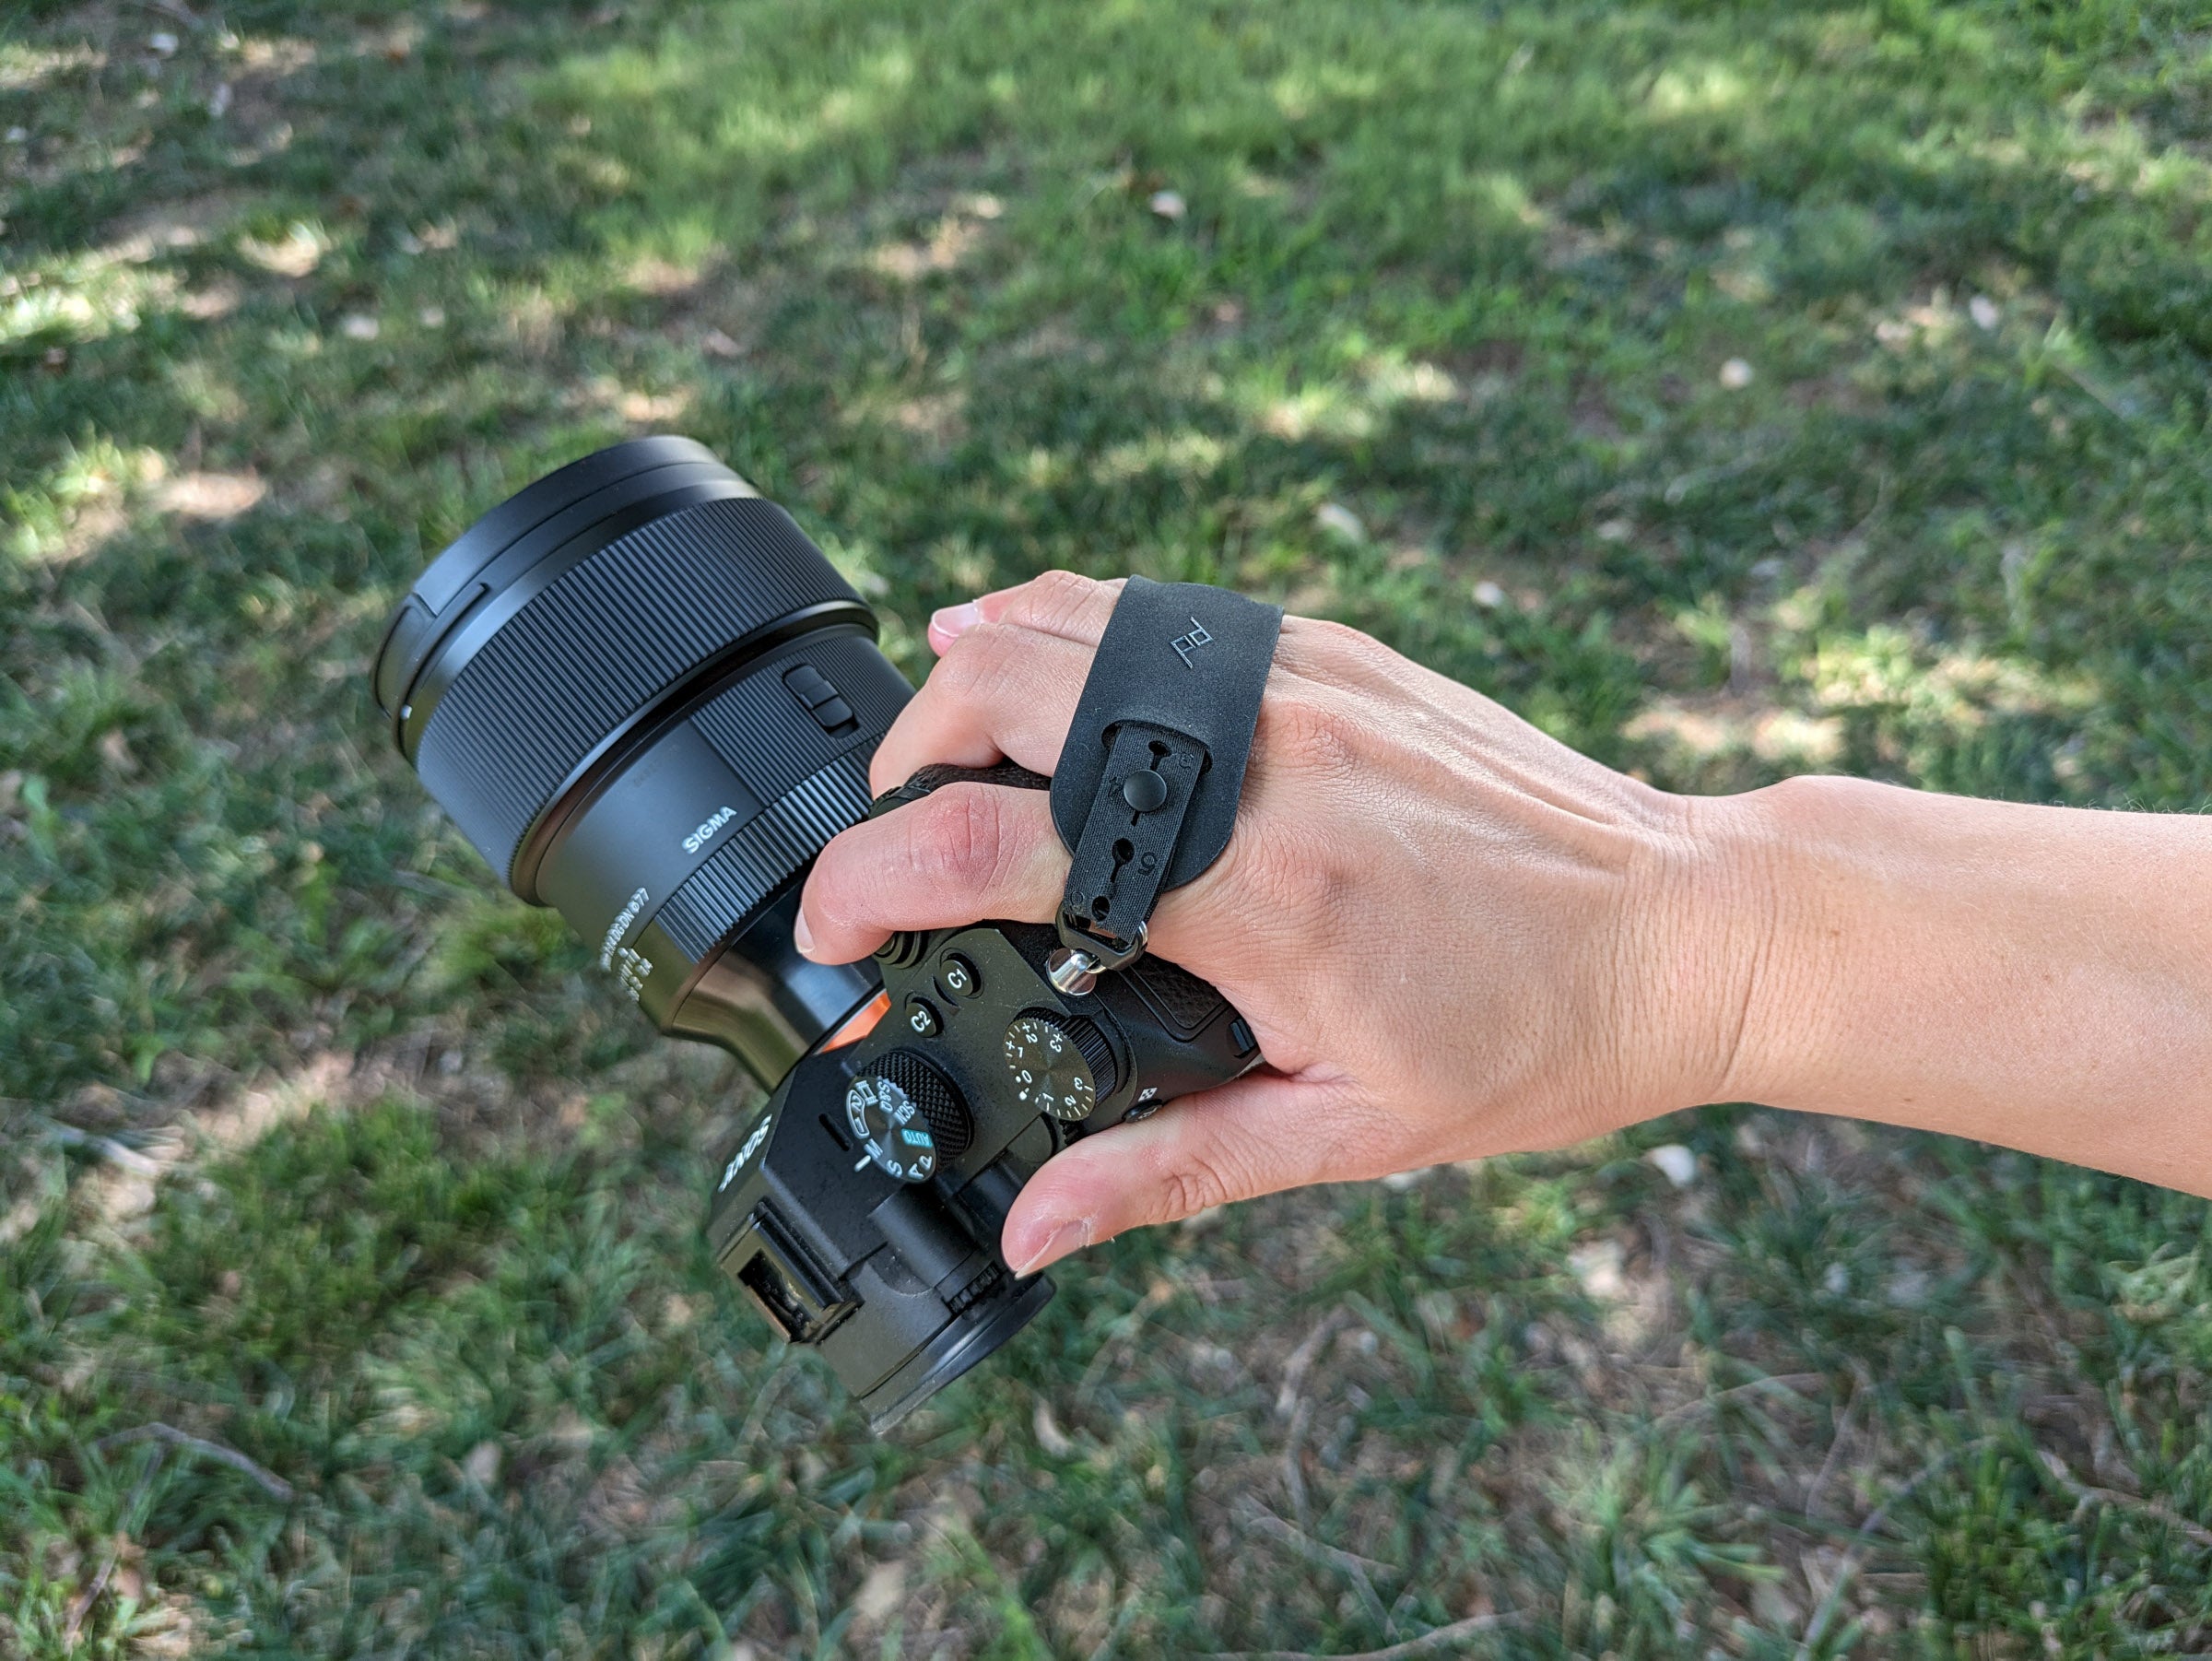 Hands-on with the Peak Design Micro Clutch: A more comfortable way to hold your camera